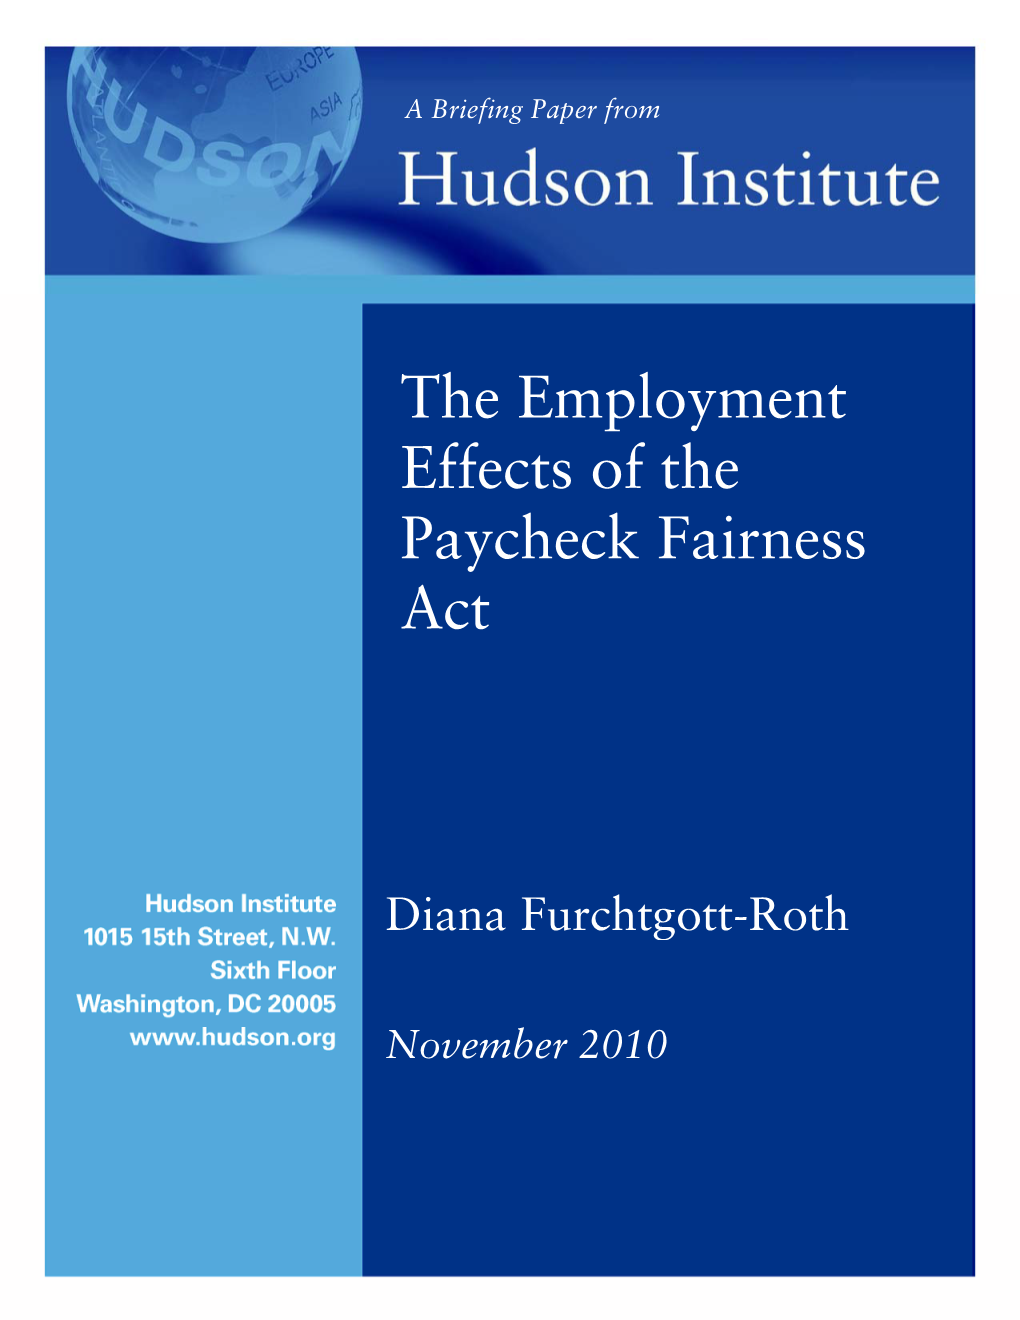 The Employment Effects of the Paycheck Fairness Act